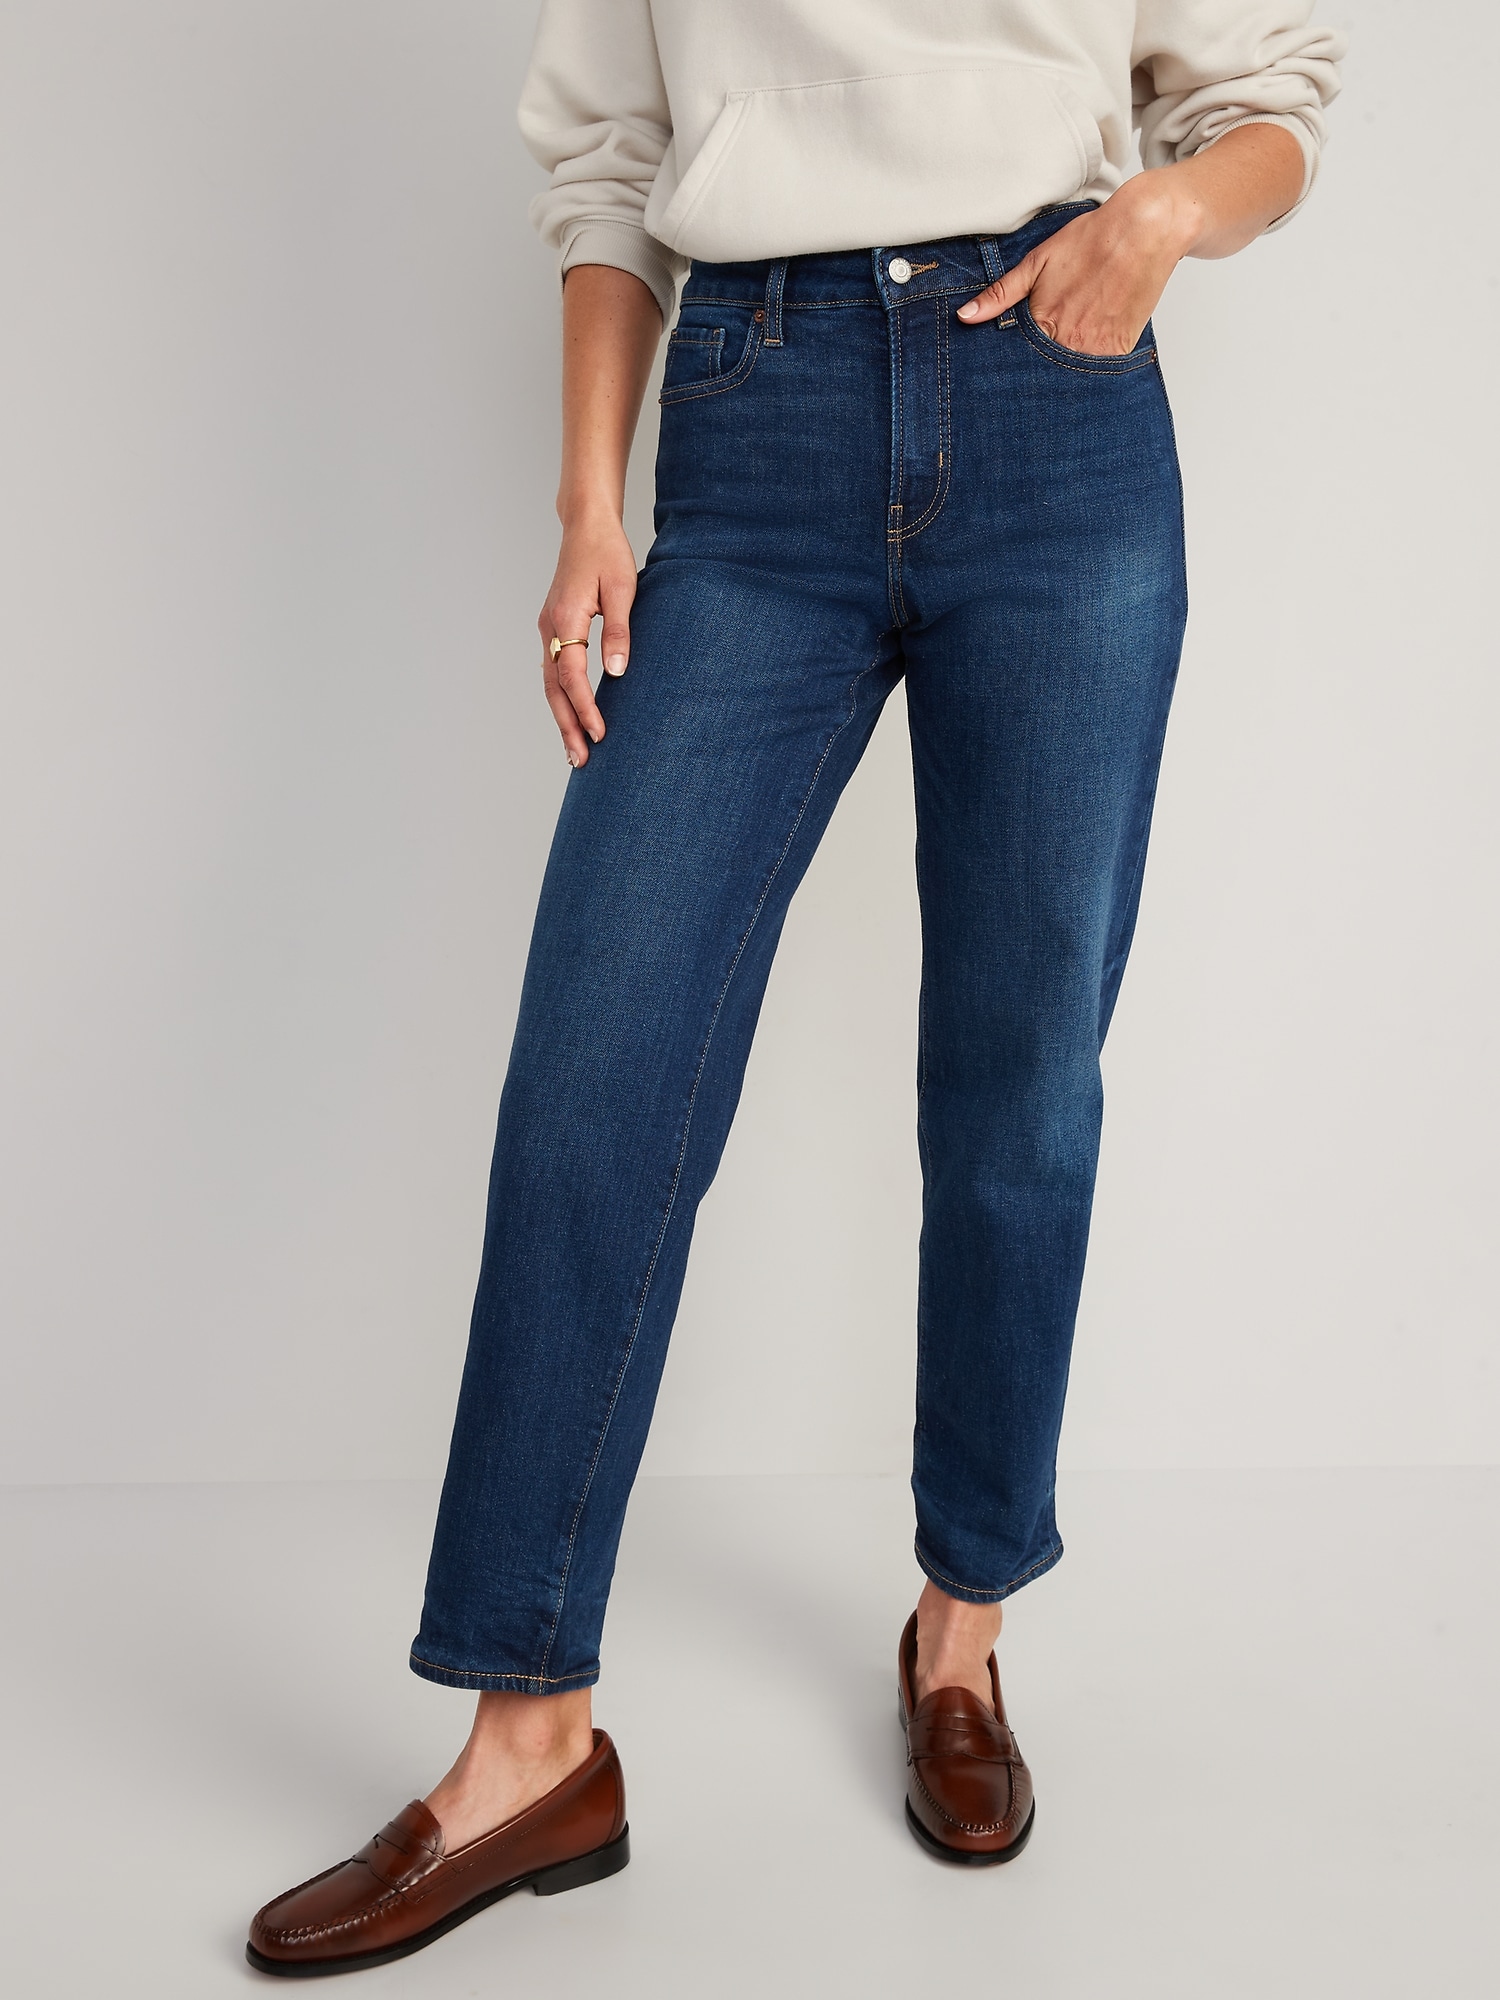 Old Navy Women's High-Waisted OG Loose Jeans - - Plus Size 18